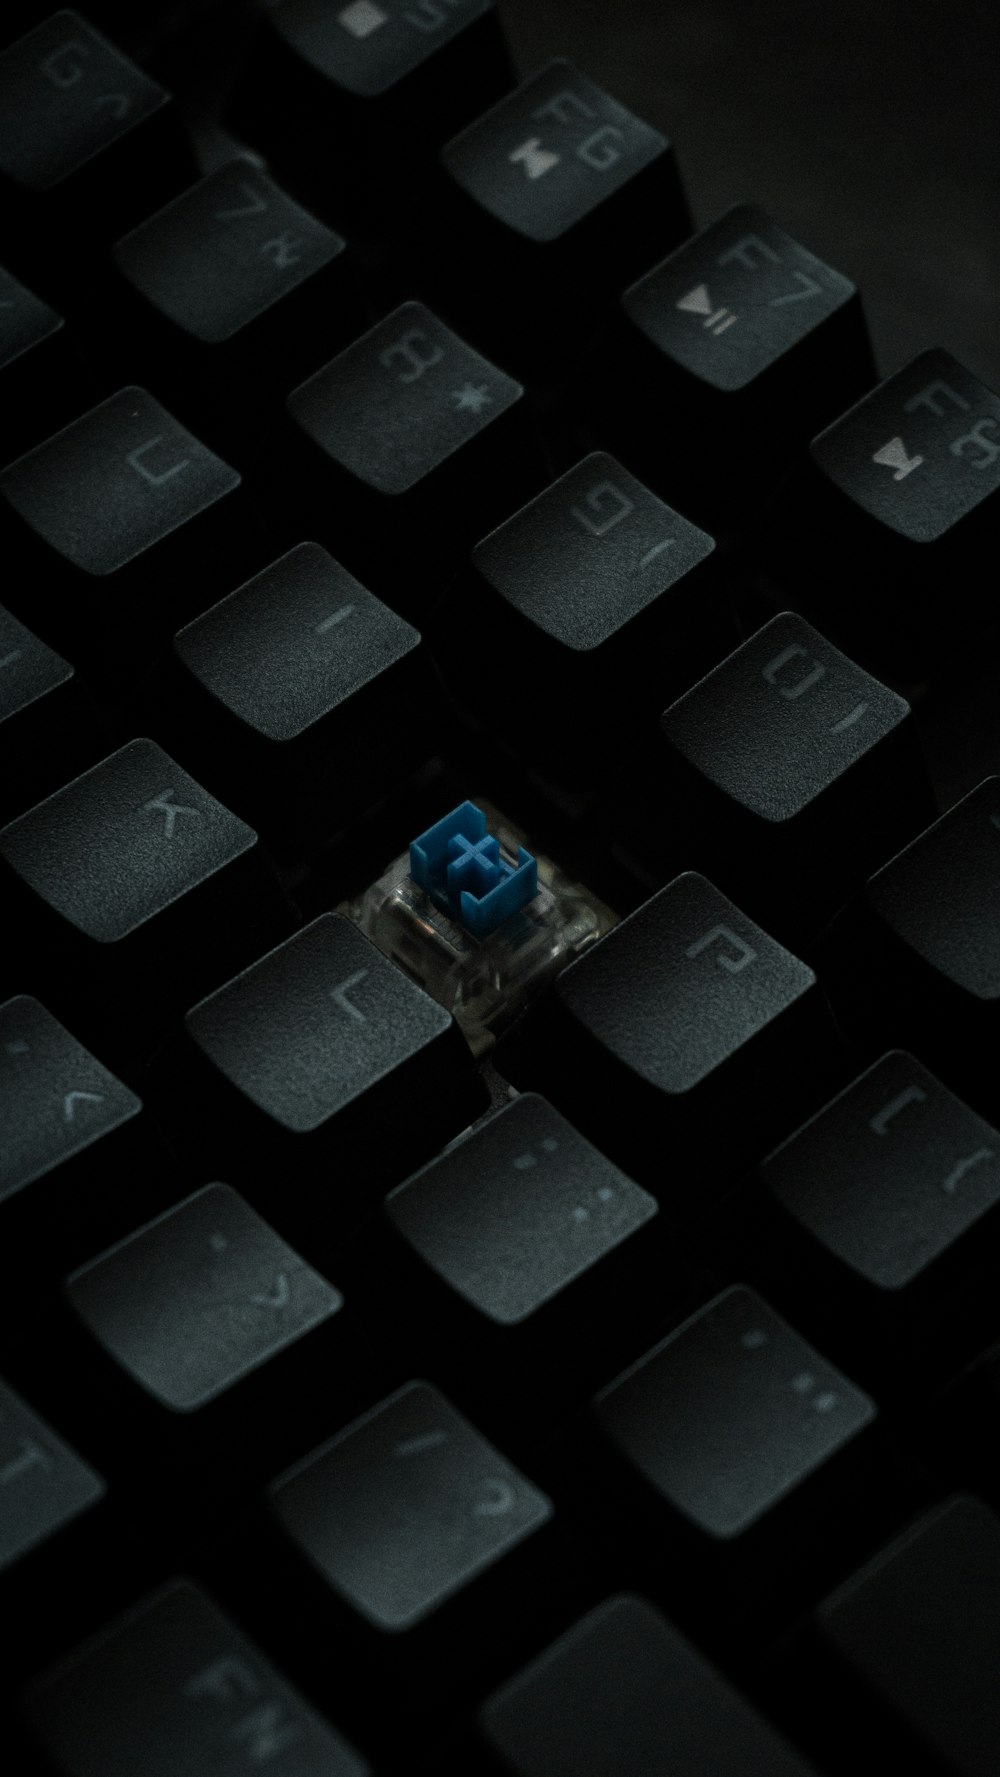 a close up of a computer keyboard with a blue button